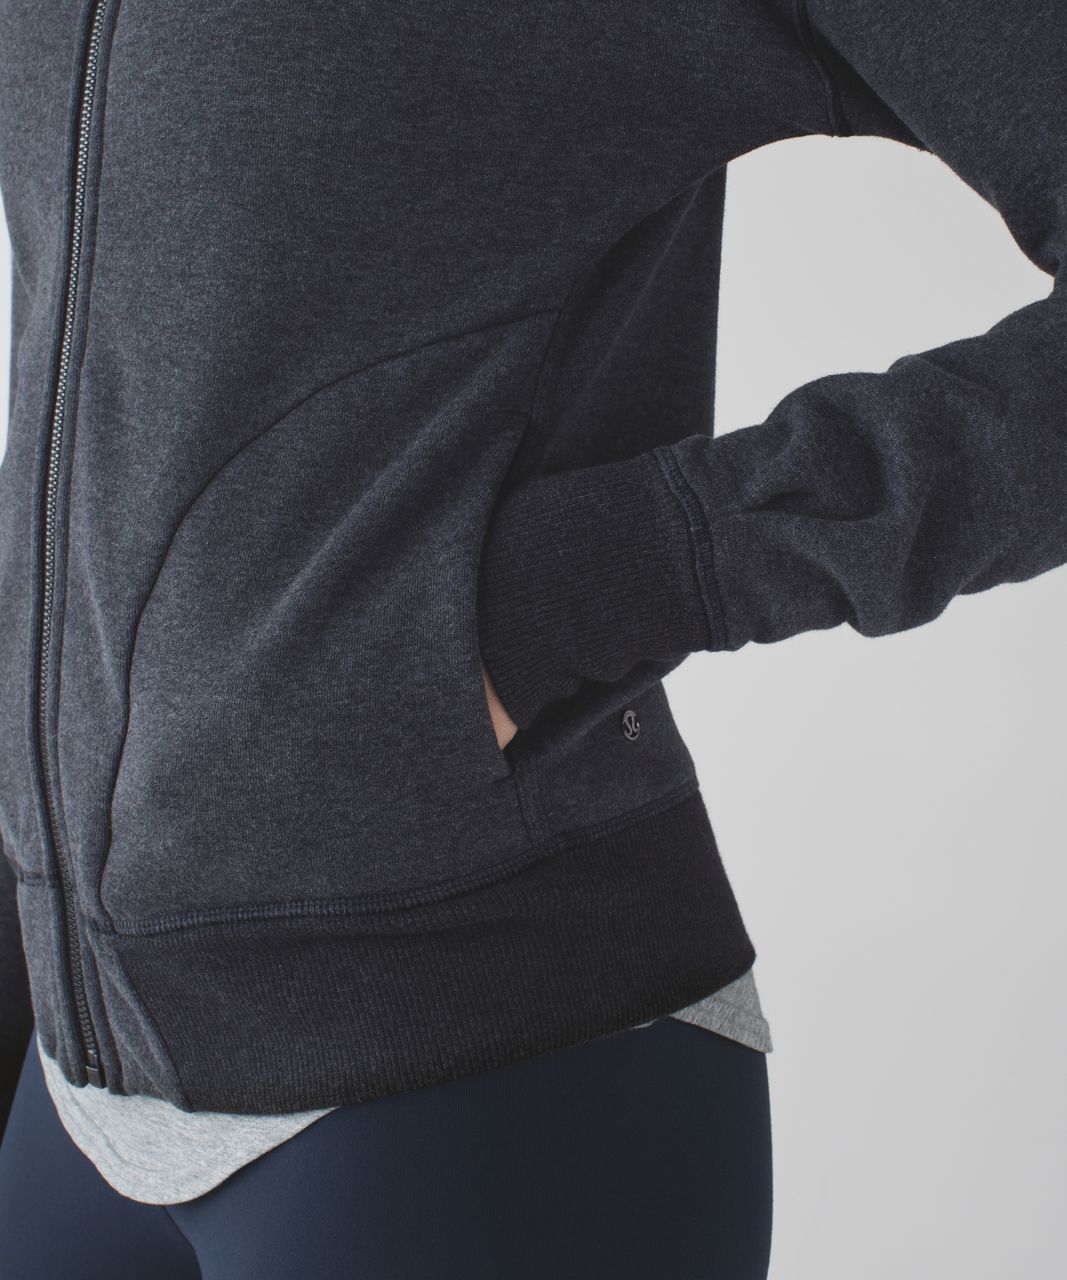 Rest Less Pullover + Hug It Out Jacket + Totally Toasty